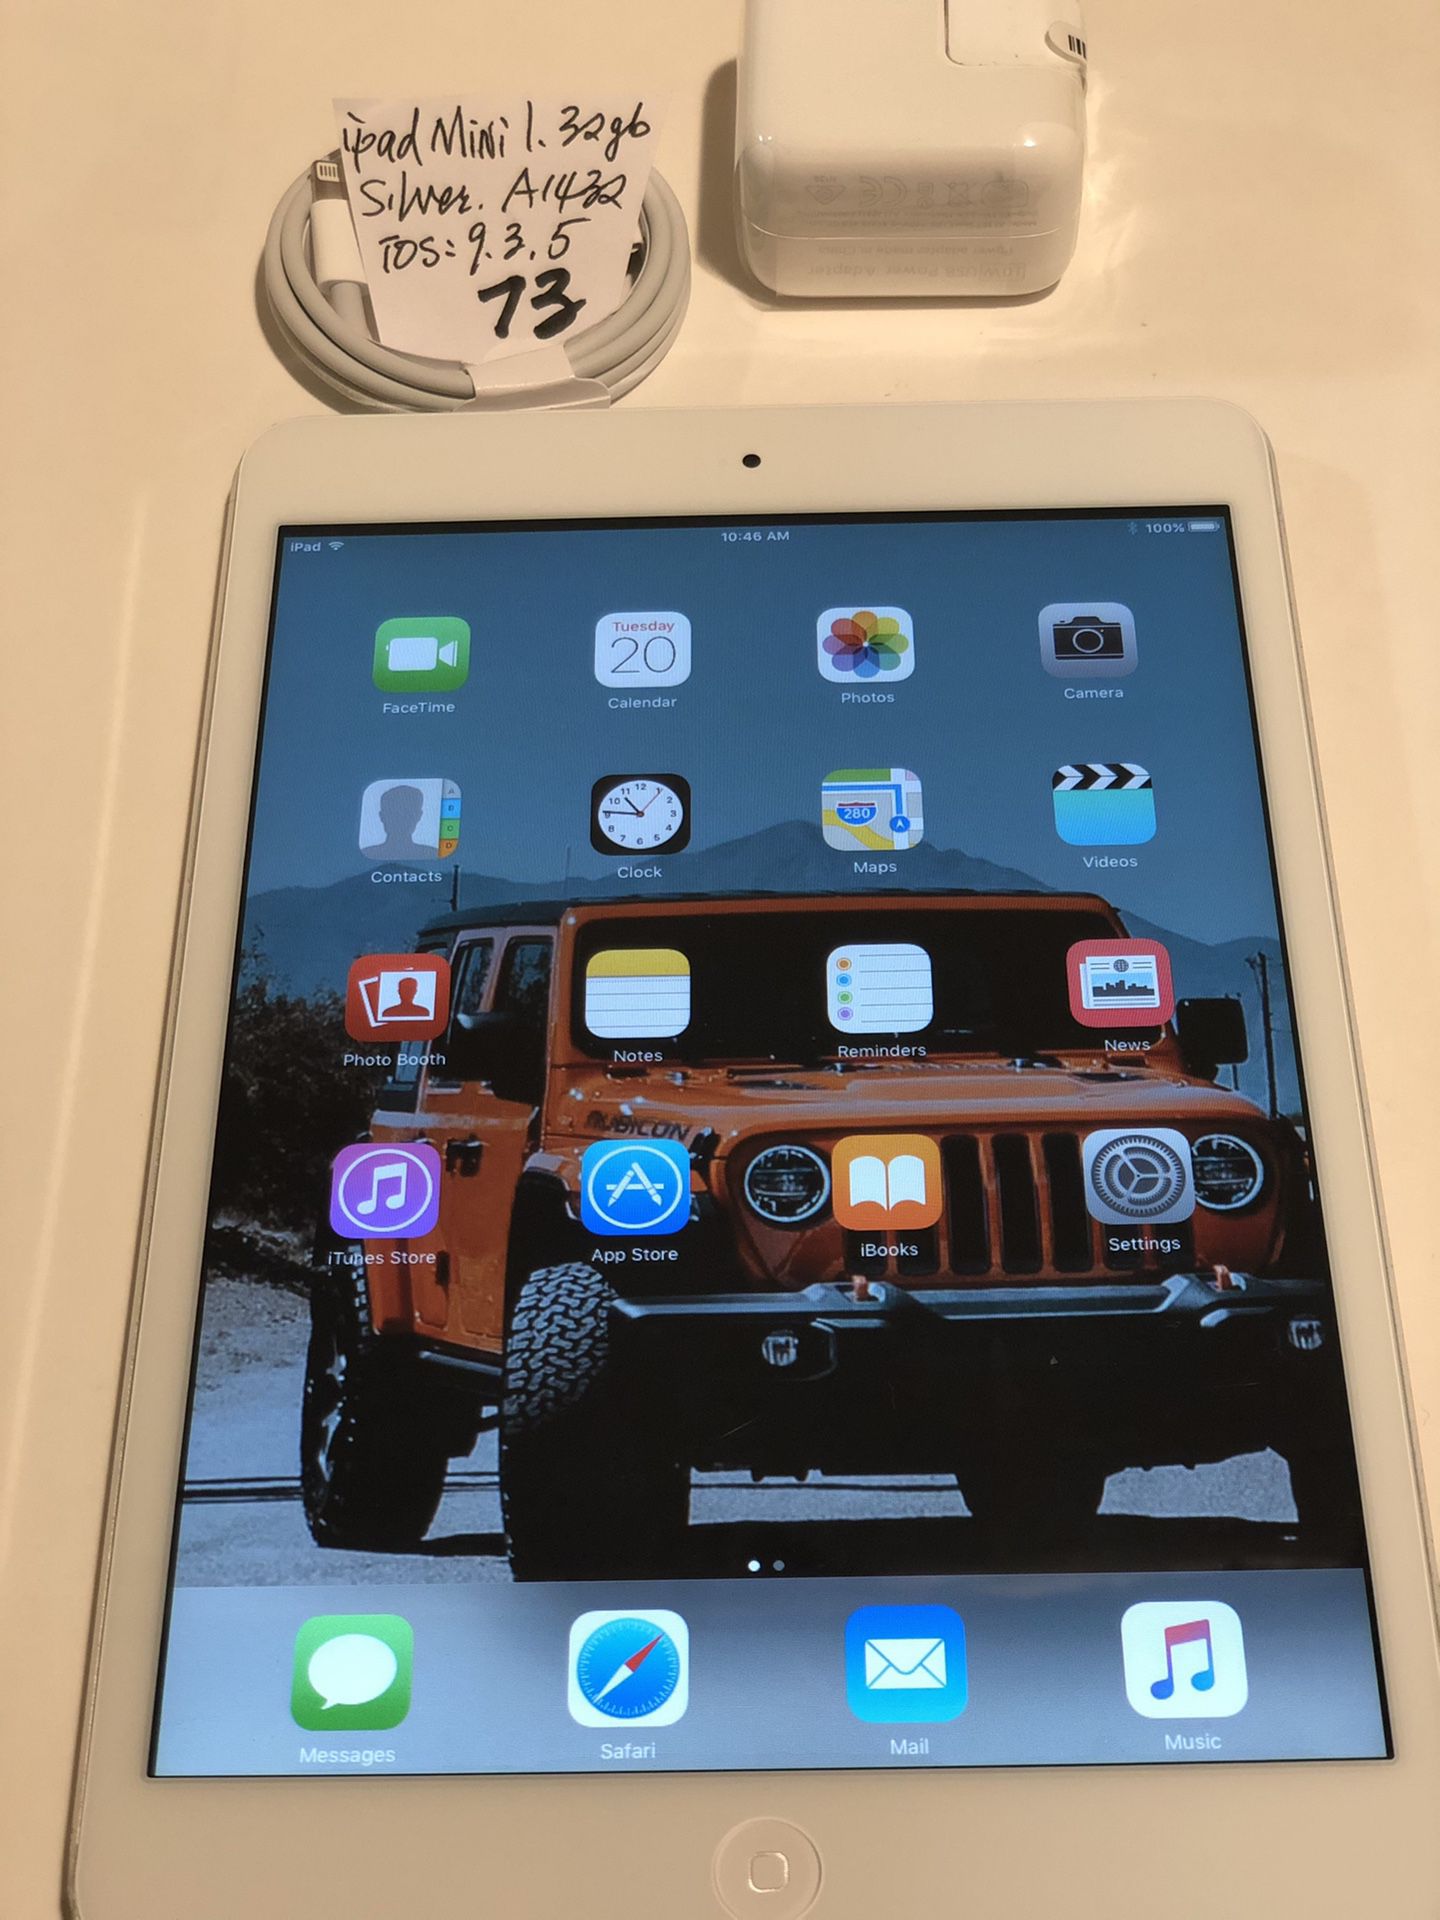 Apple ipad mini 1,32 GB, WiFi 7.9”,iOS:9.3.5. Silver/White,A1432,Clean iCloud,Fully Functional,Good Condition.iOS only 9.3.5.